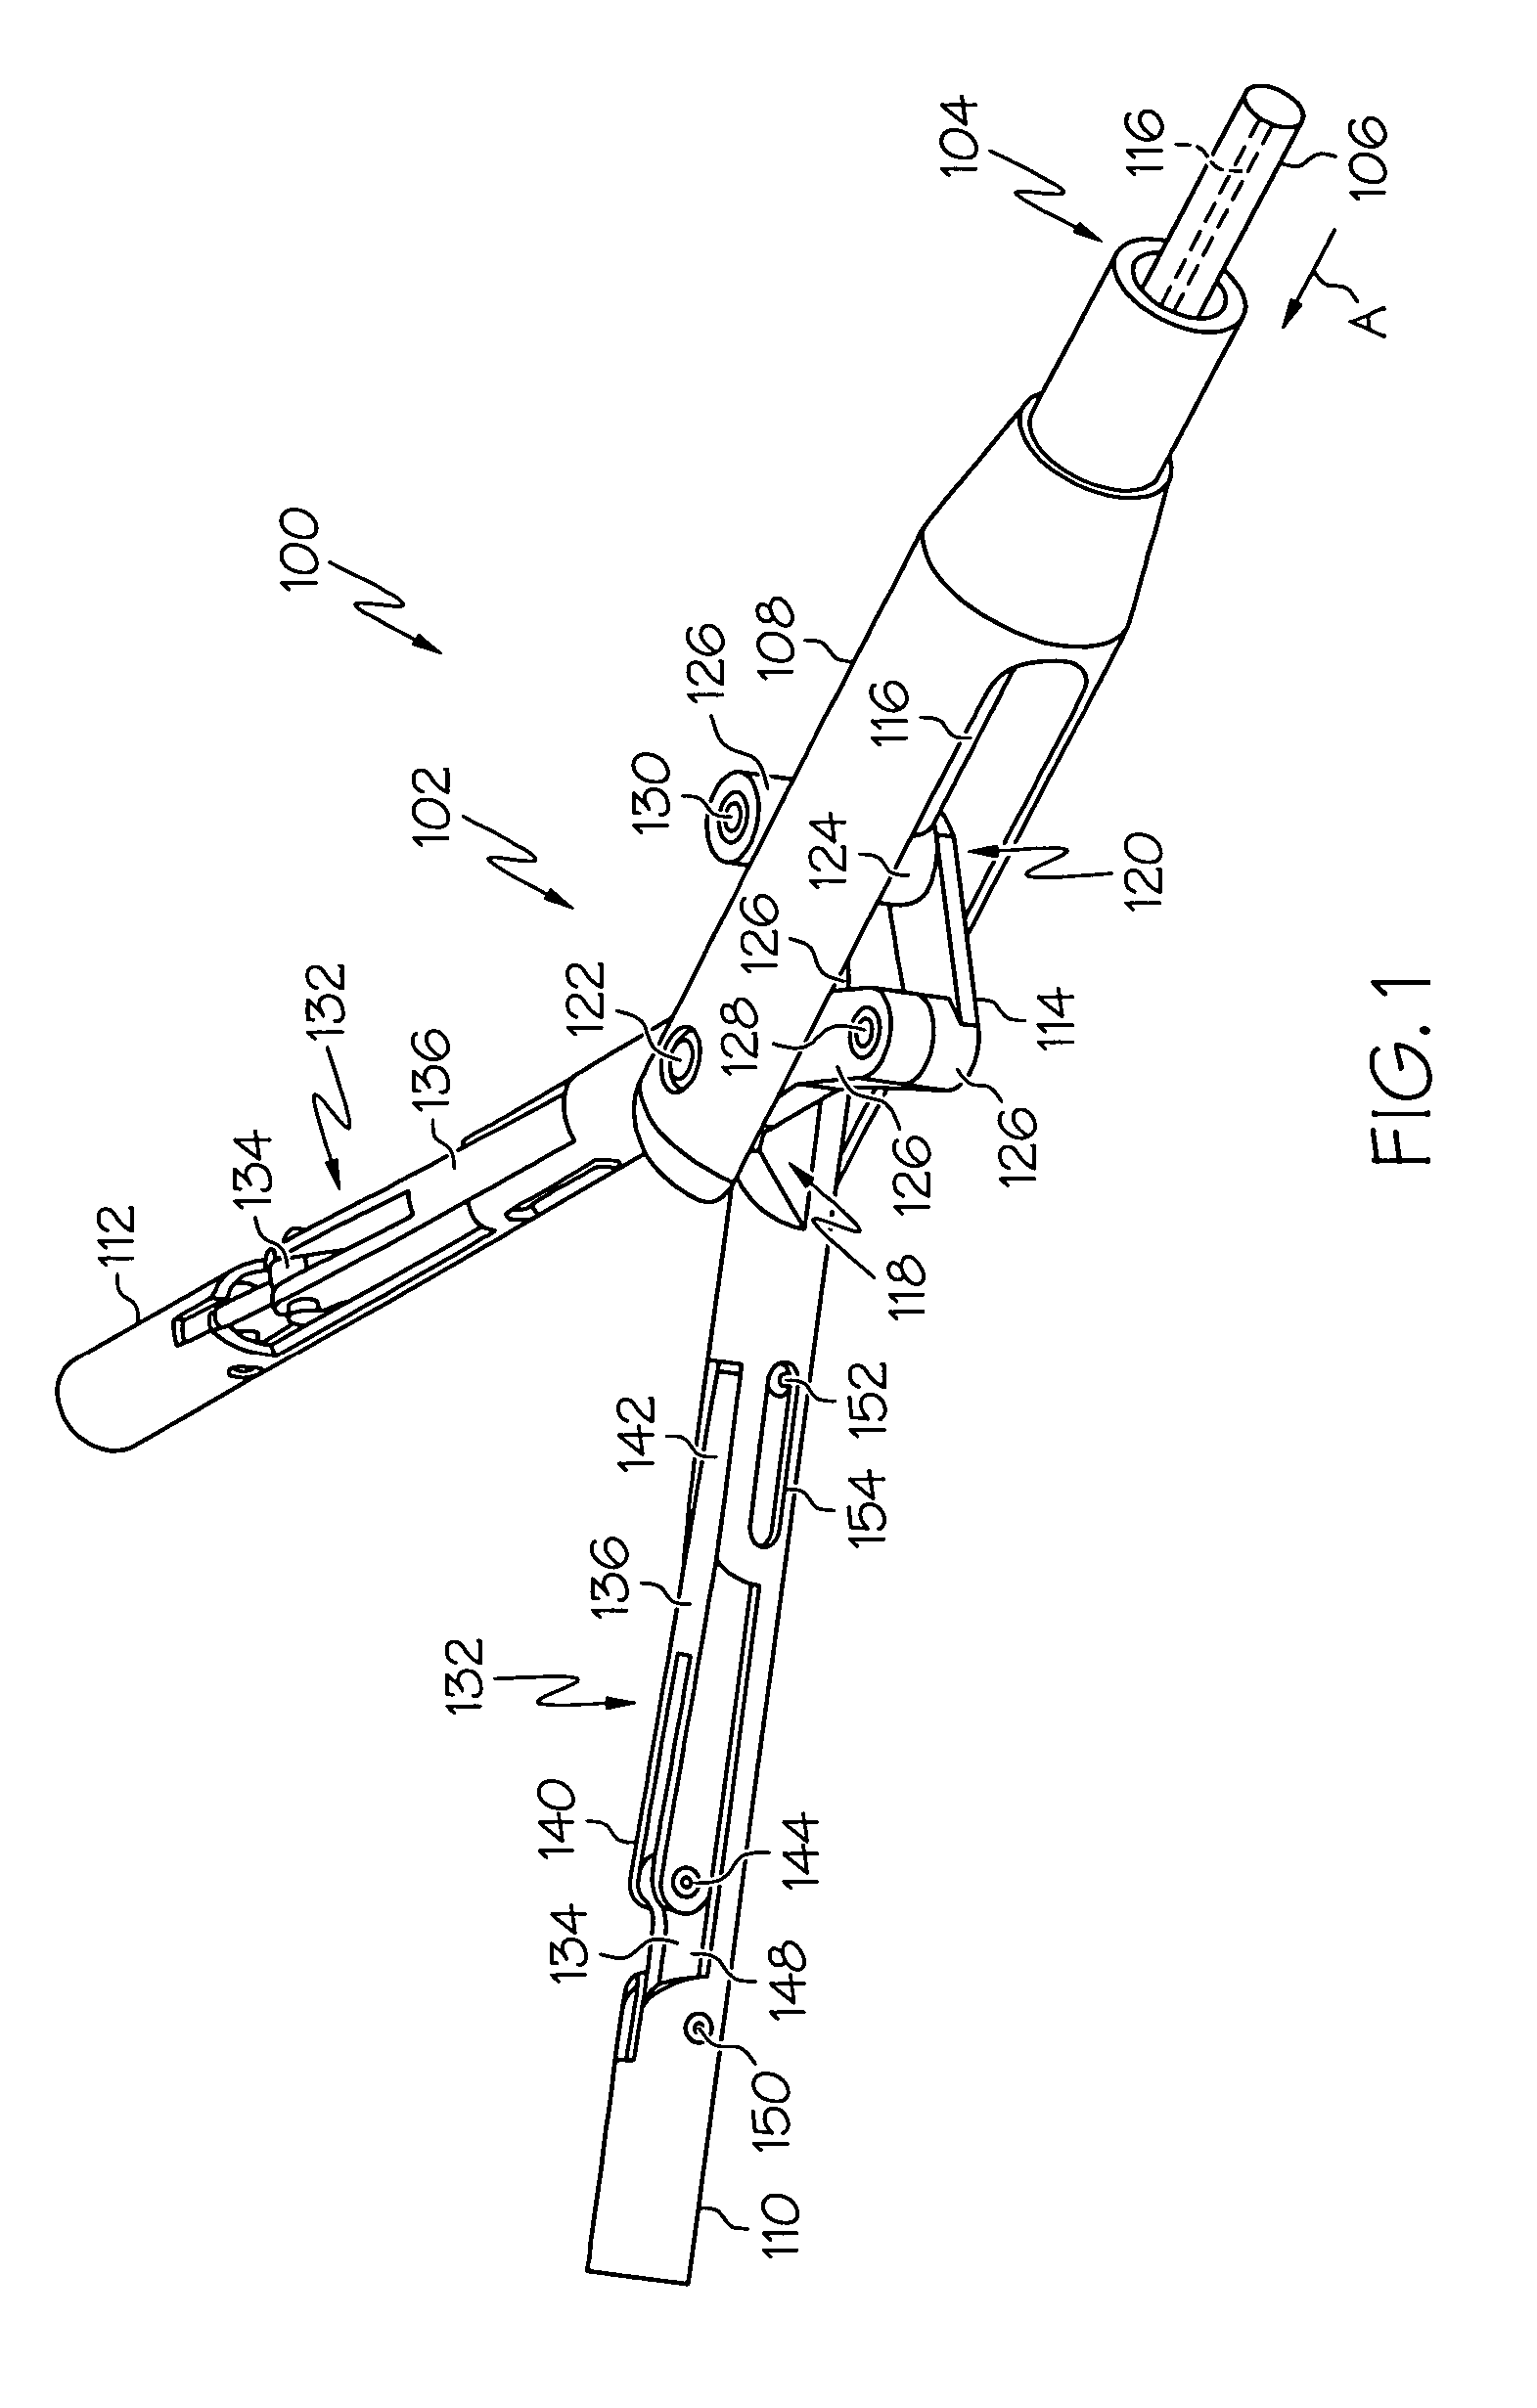 Apparatus and method for performing an endoscopic mucosal resection